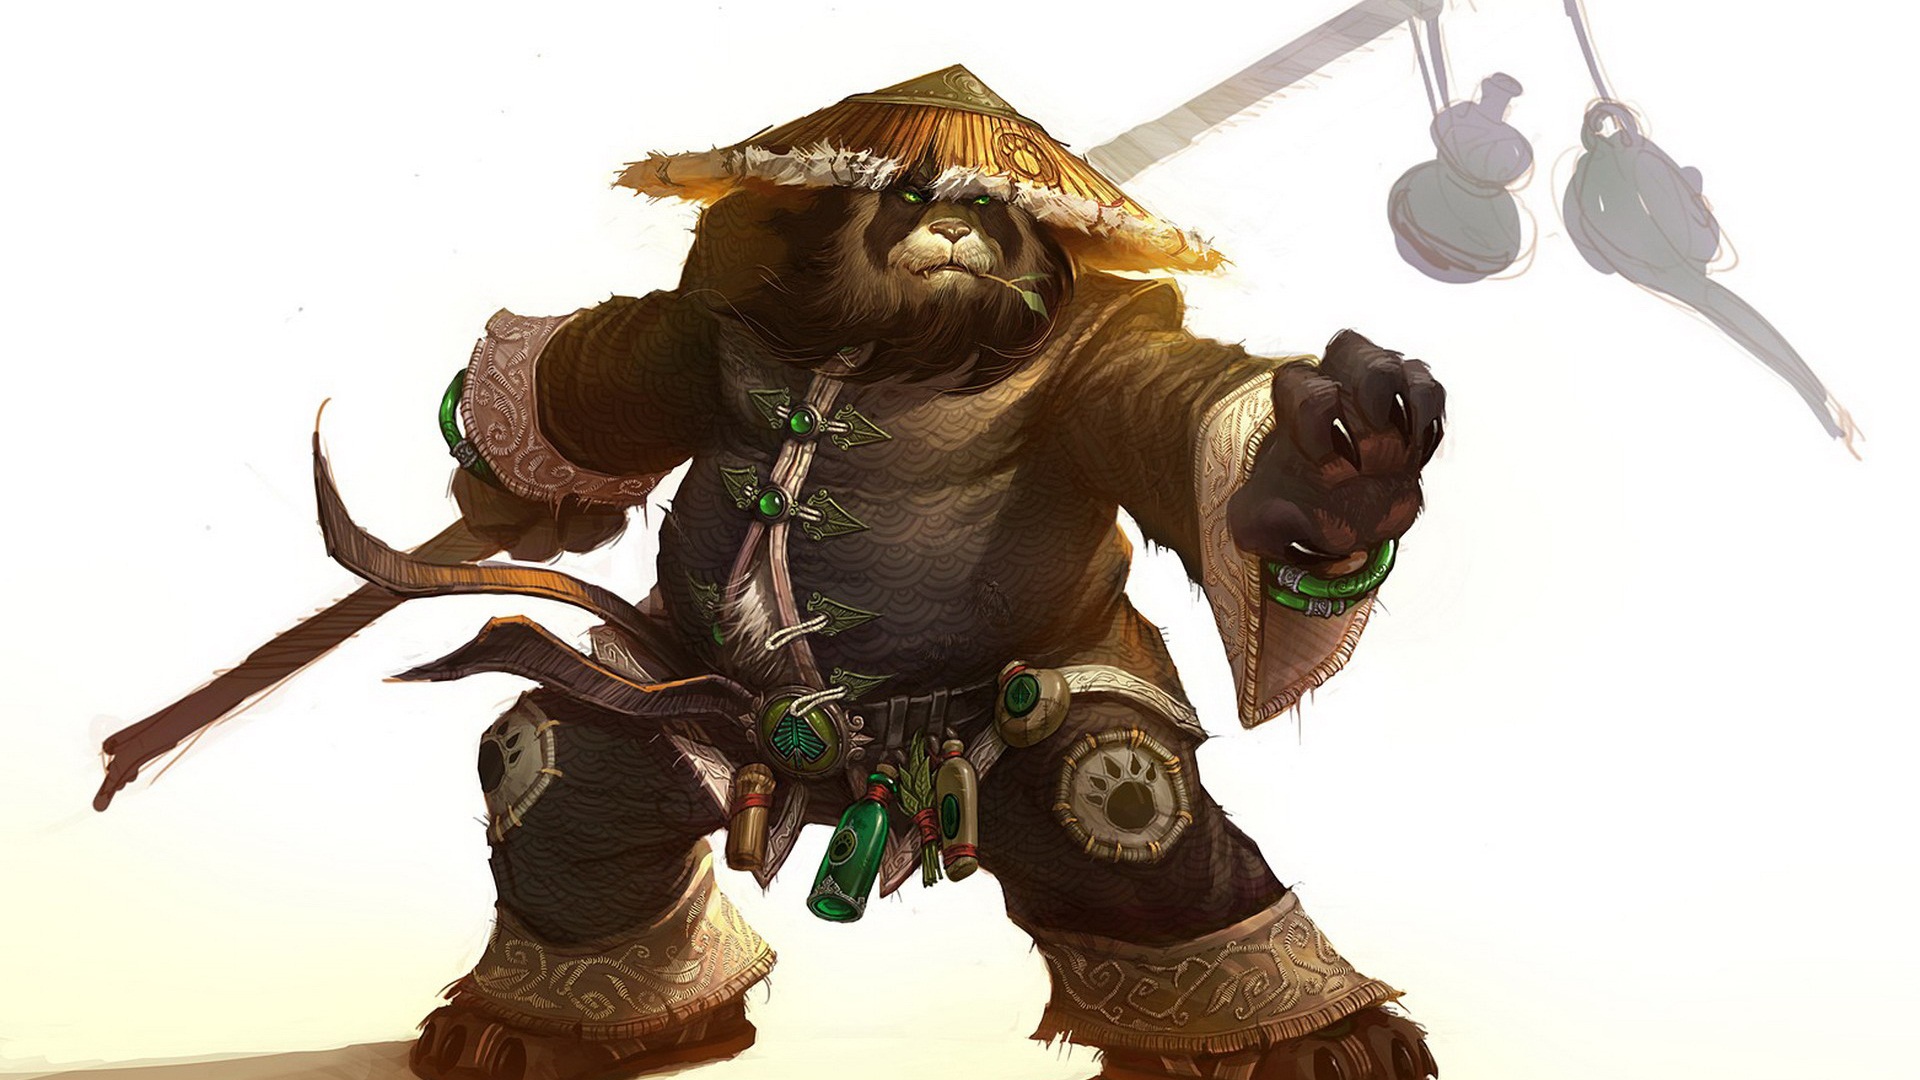 World of Warcraft: Mists of Pandaria HD wallpapers #9 - 1920x1080